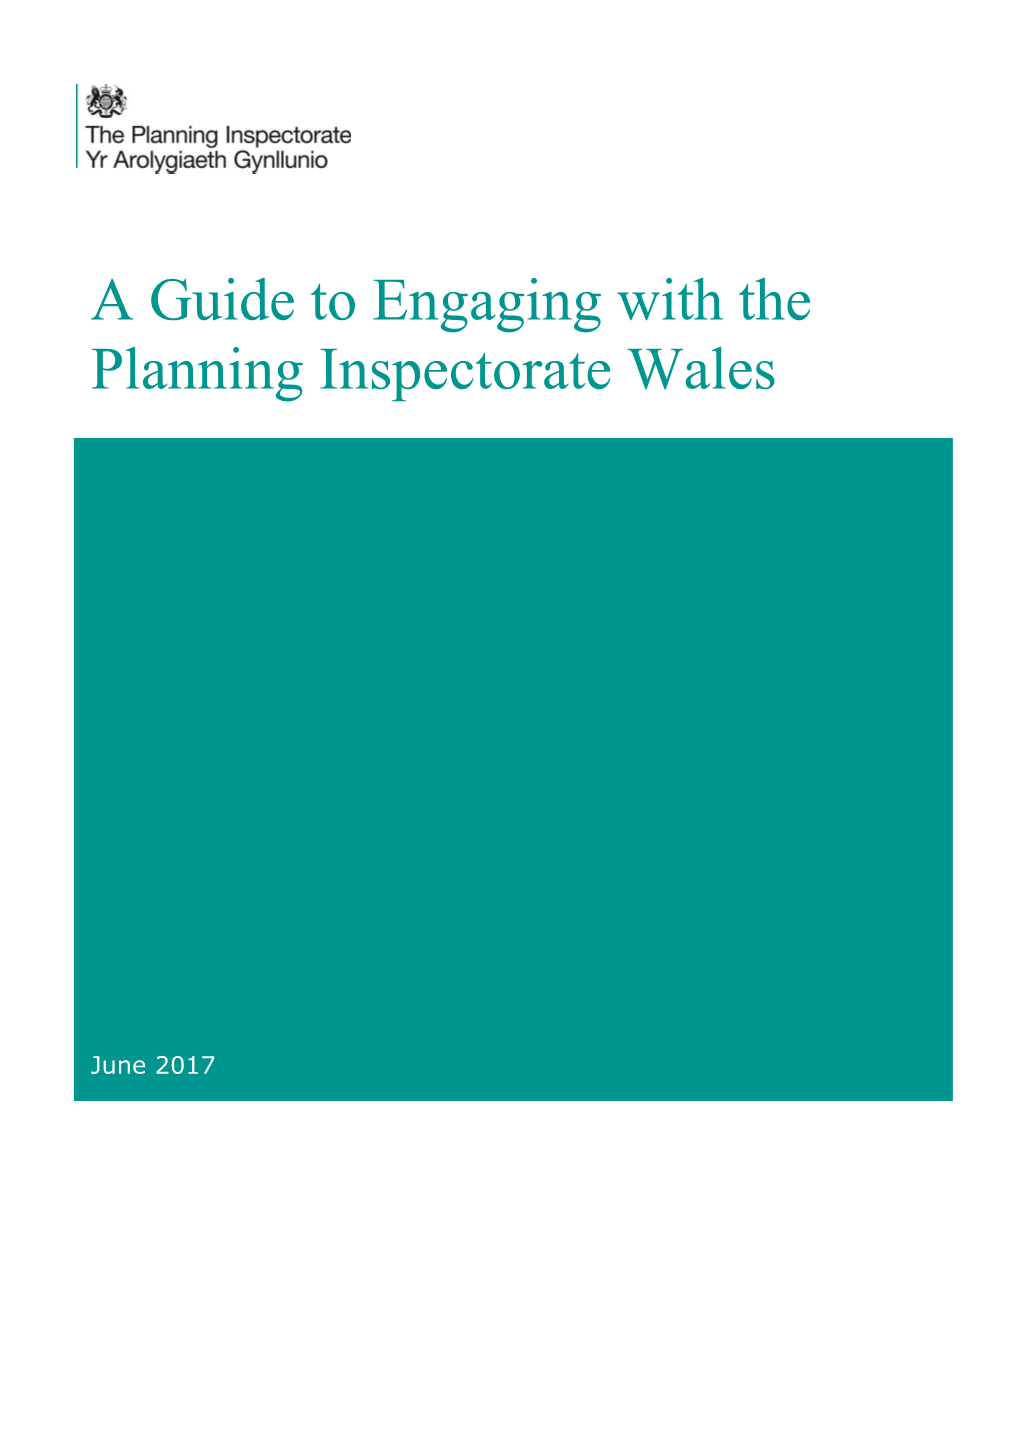 A Guide to Engaging with the Planning Inspectorate Wales